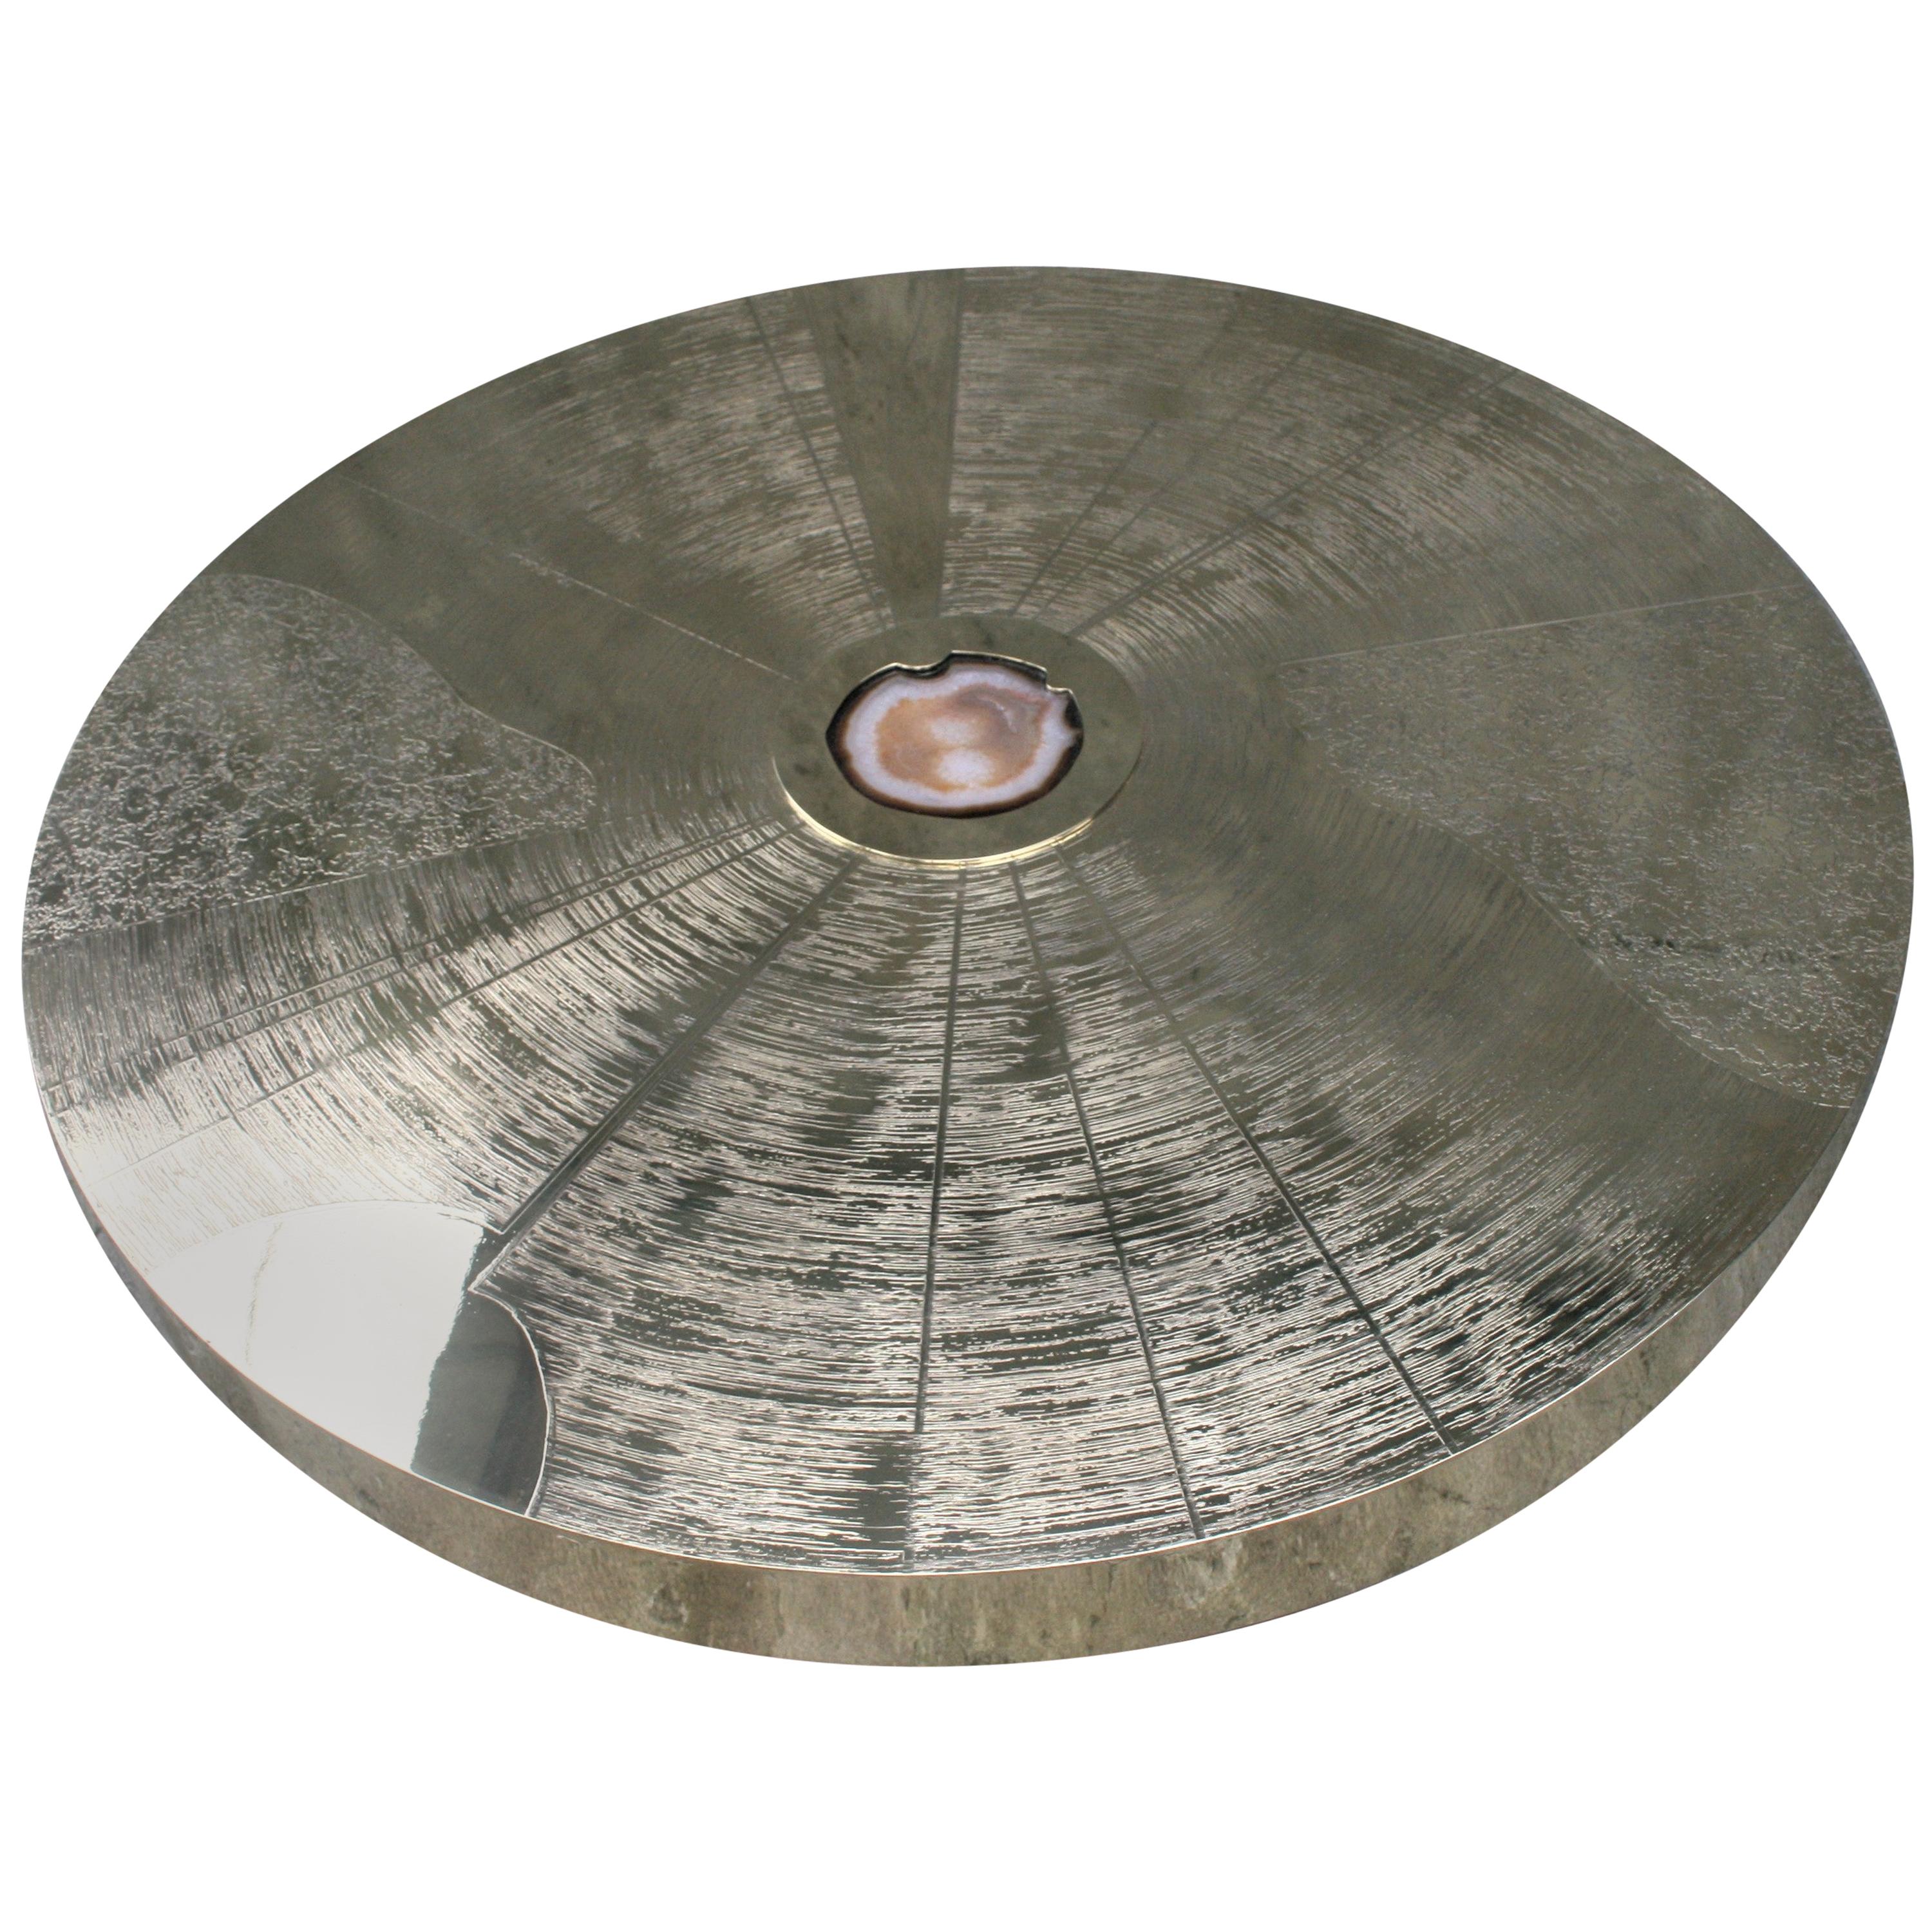 Constructivism Art "Star Trek" Coffee Table Acid Etched Brass and Rare Agate For Sale